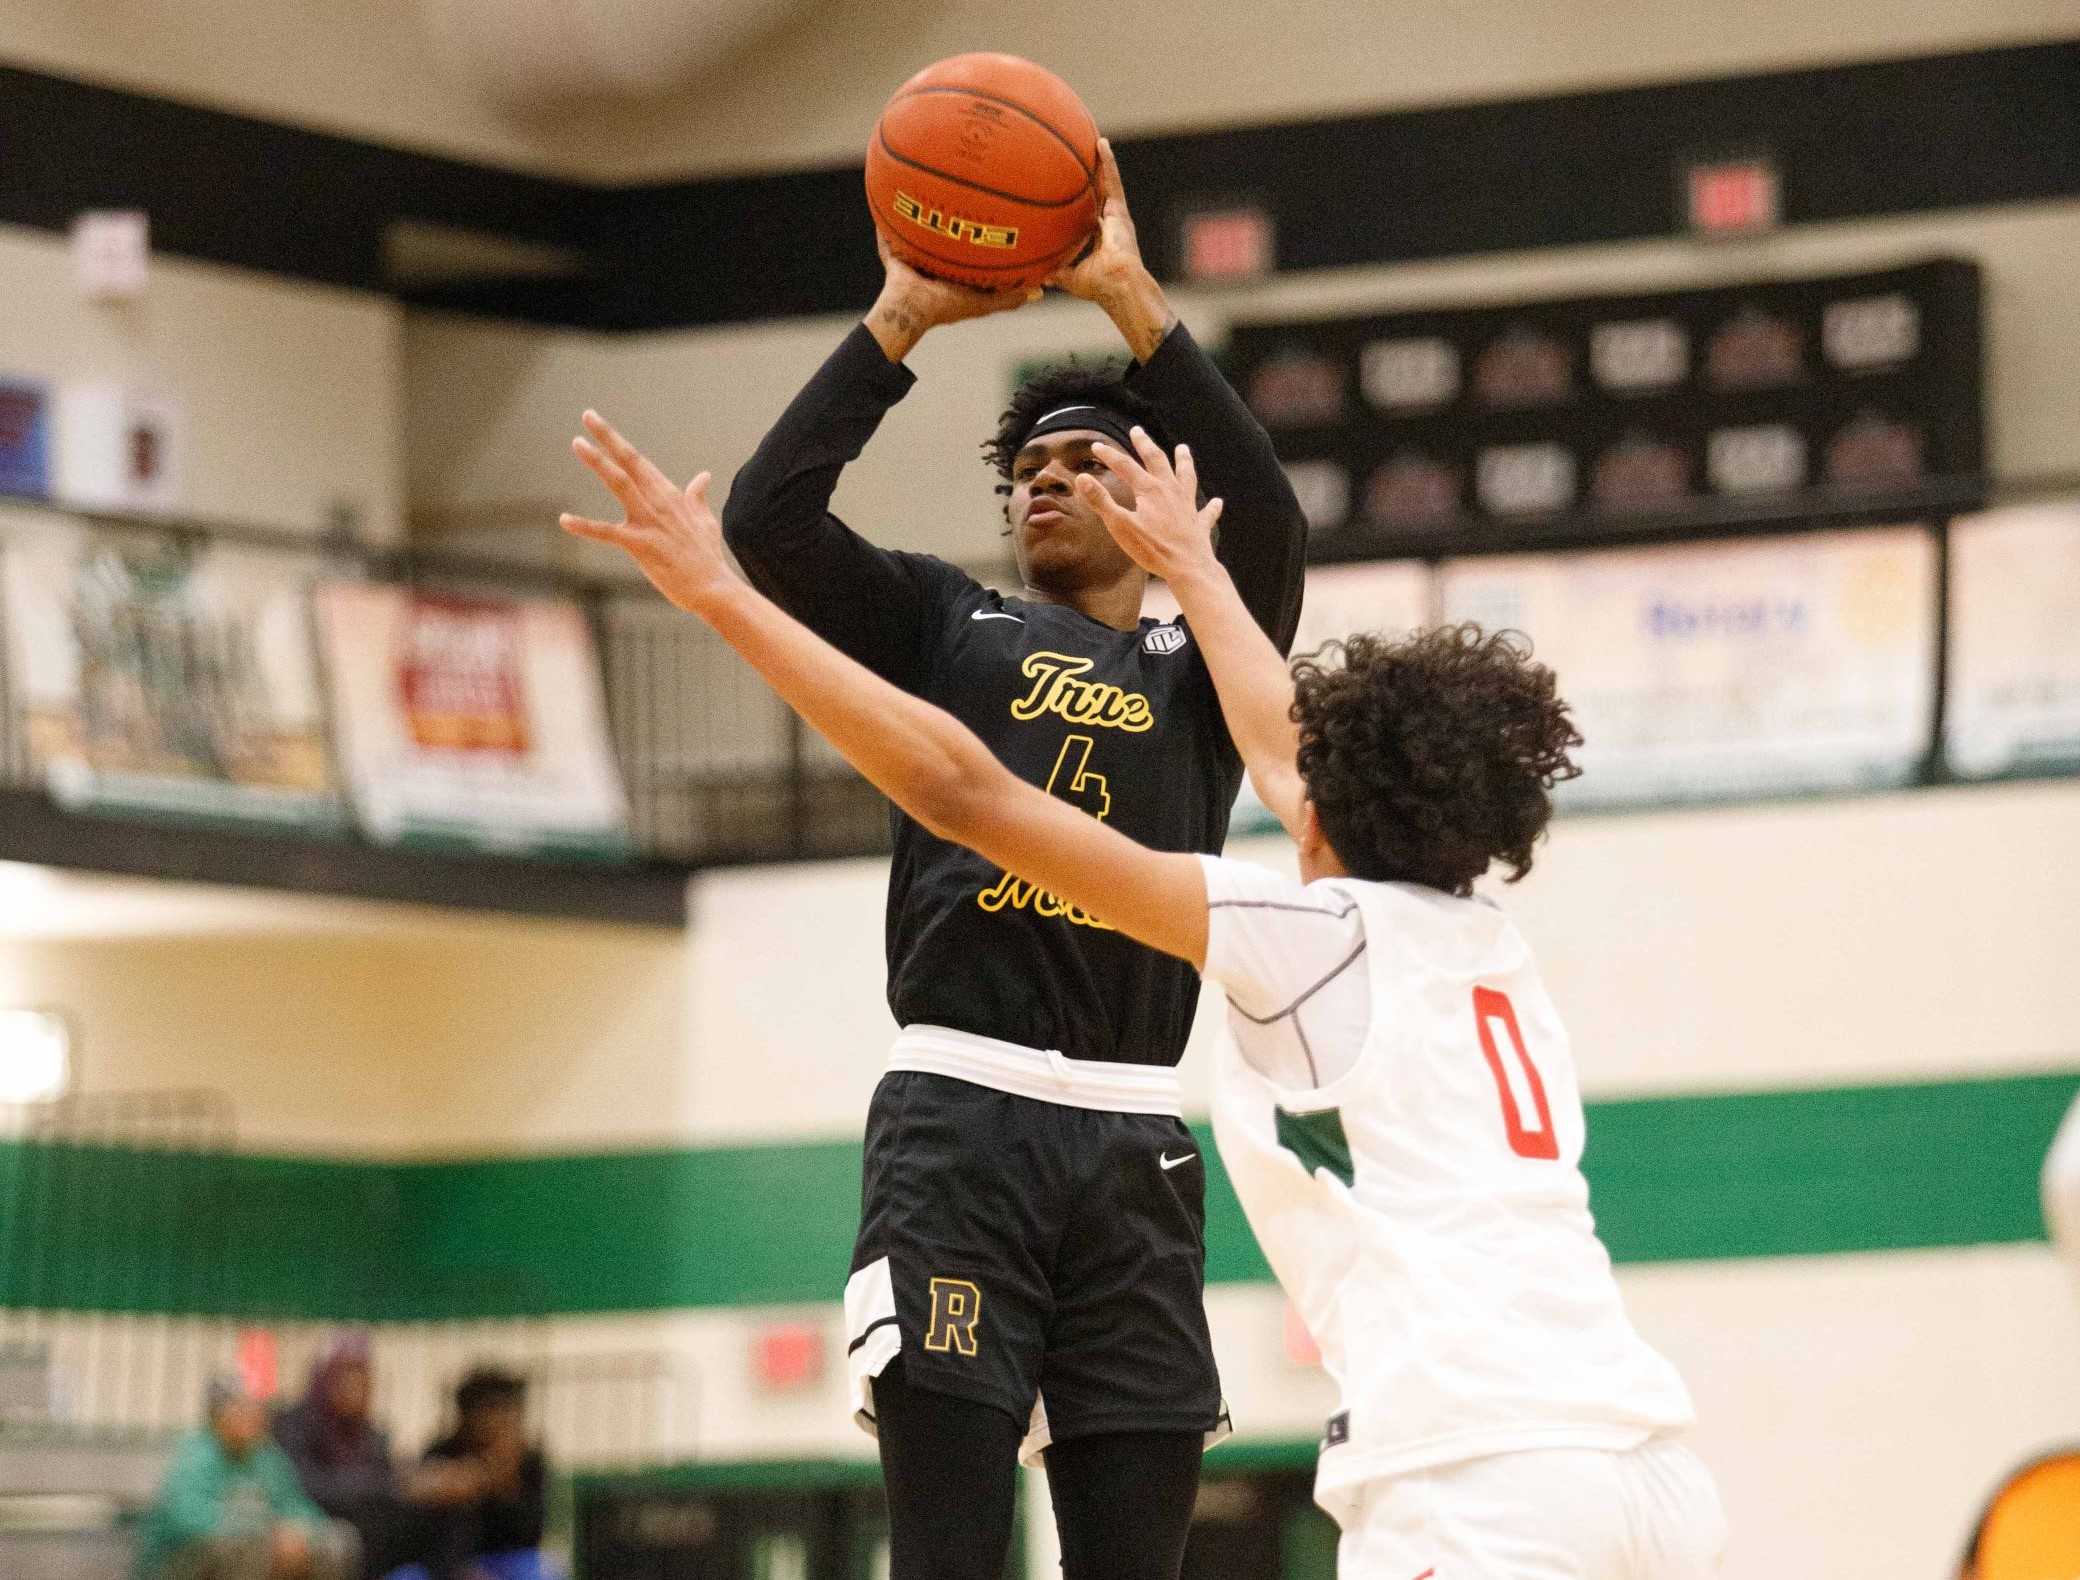 Roosevelt senior guard Chance White made seven three-pointers in last week's win over Lincoln. (Photo by Andre Waymond)